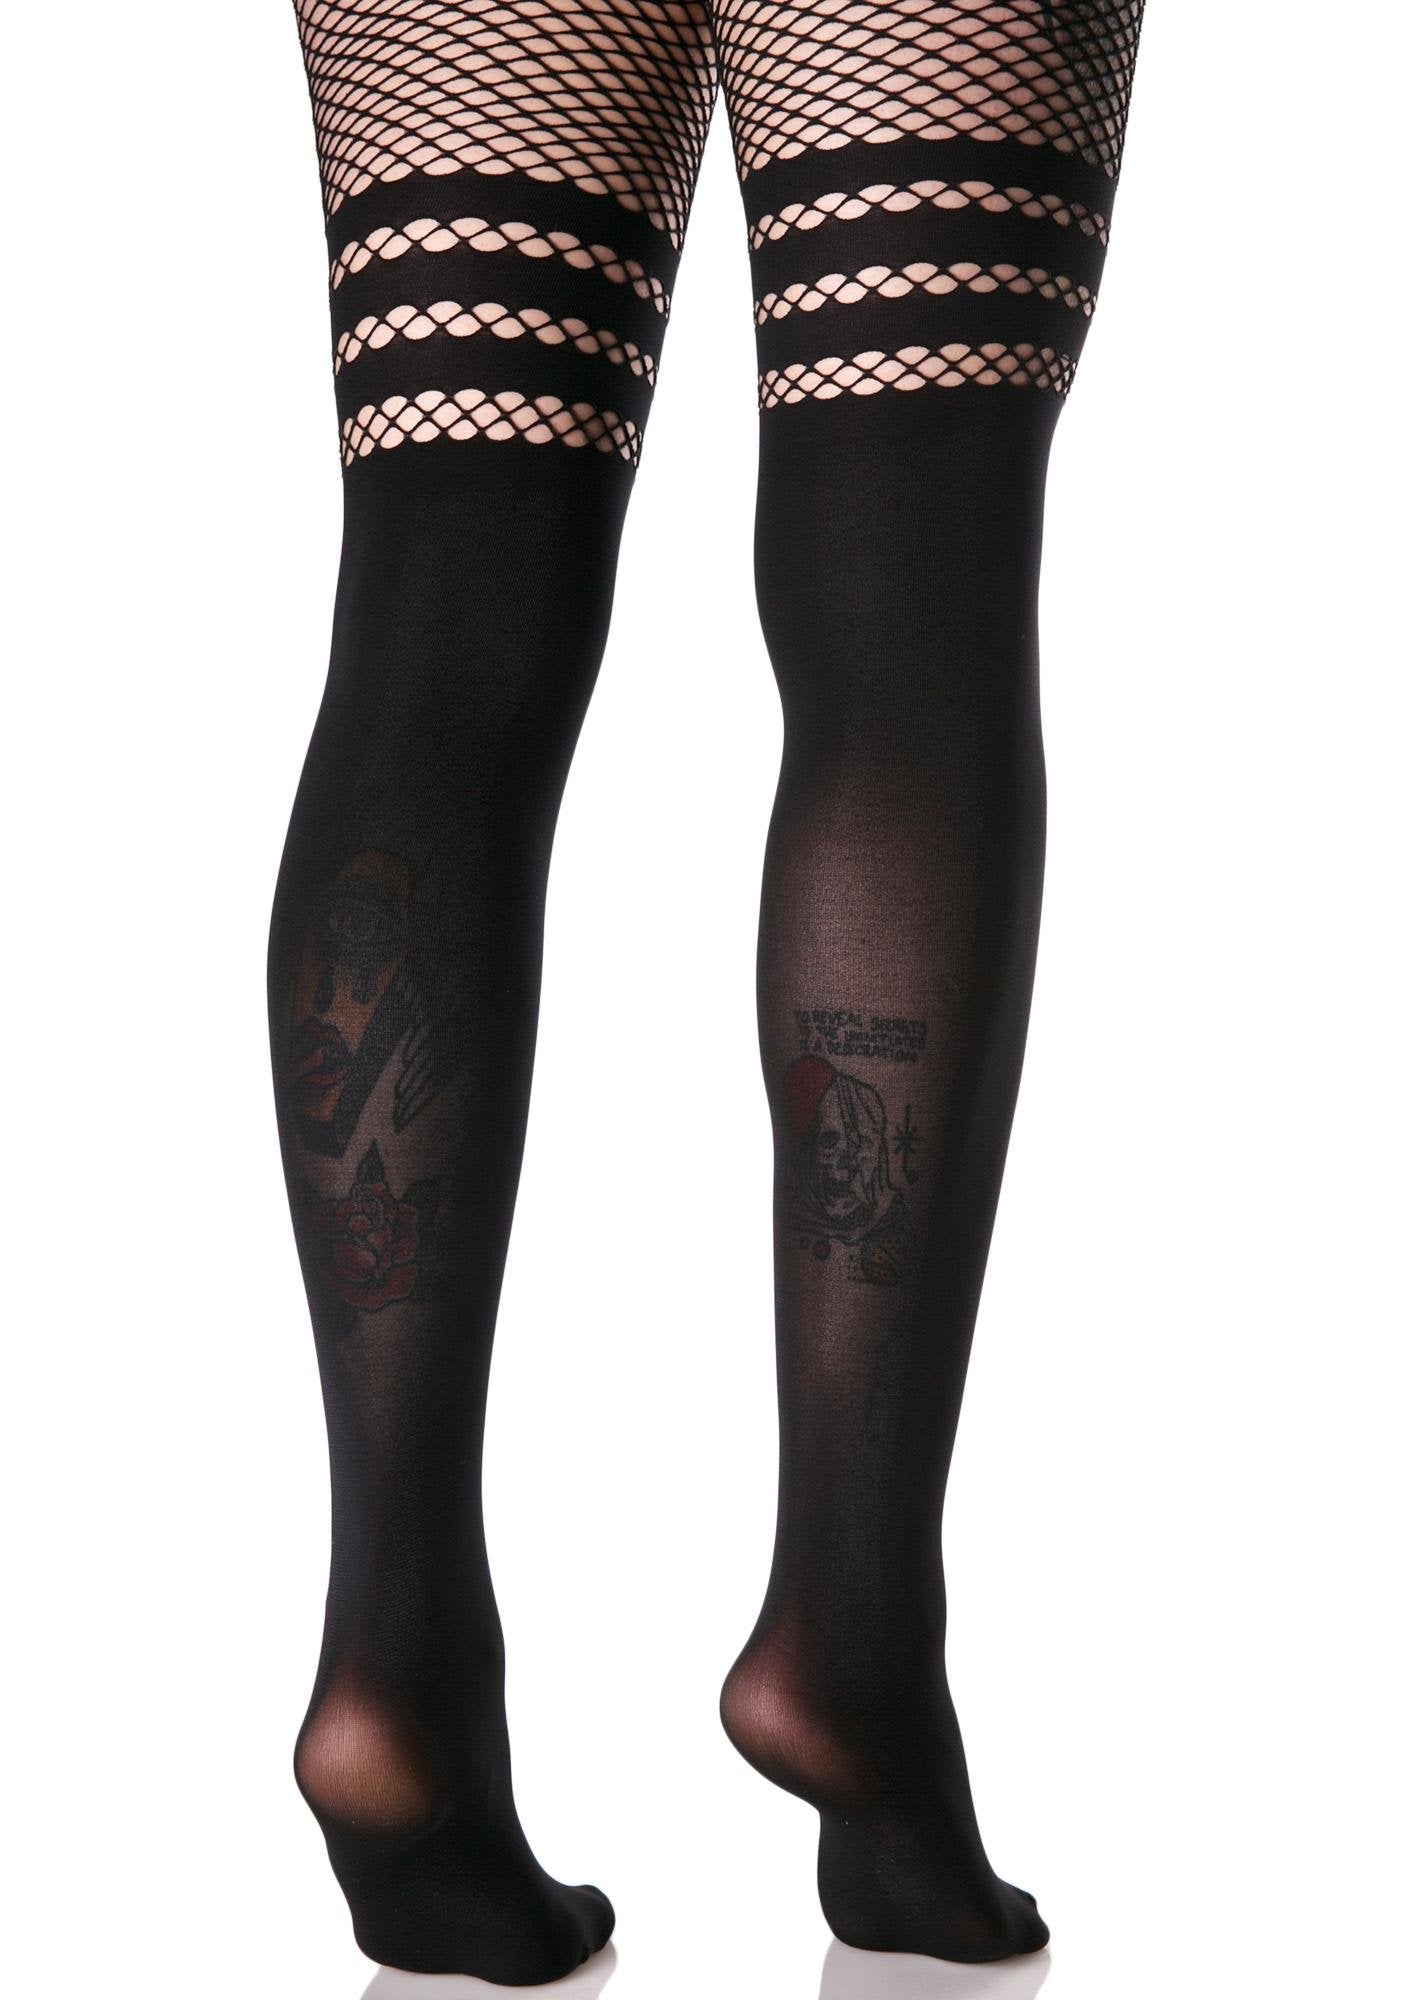 Faux Thigh High Stockings with Fishnet in Black - The Sugarpuss